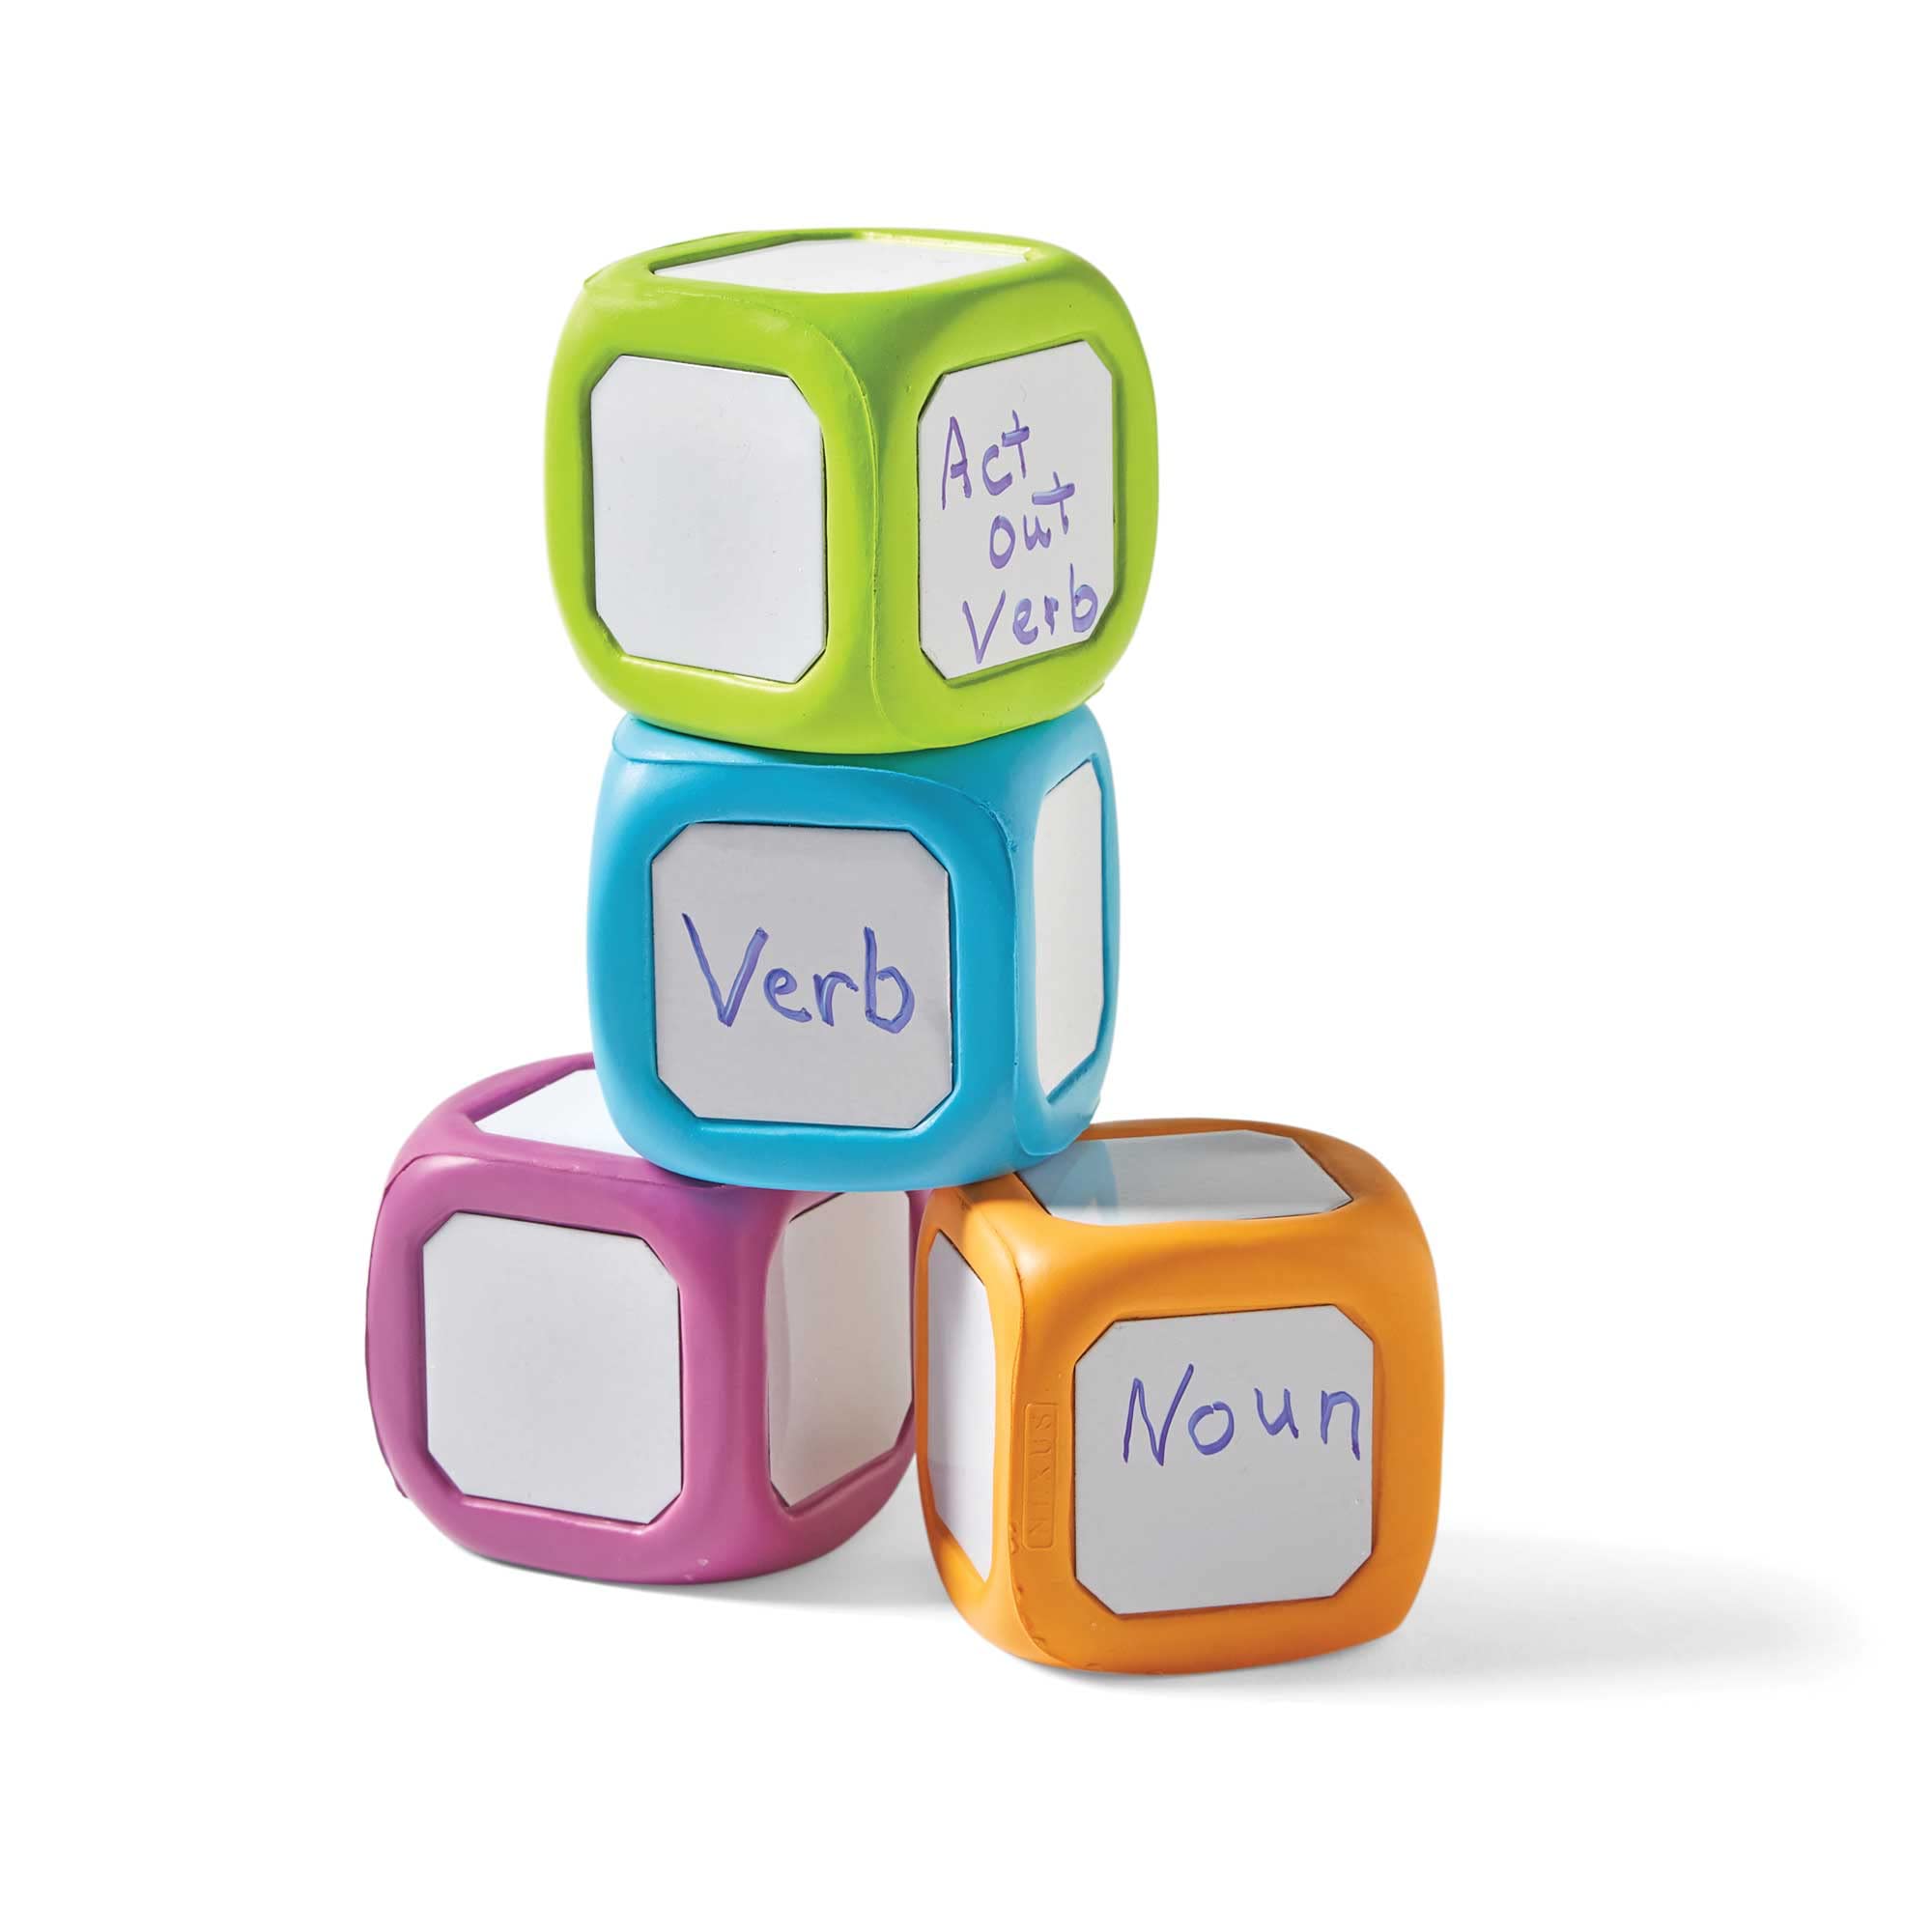 hand2mind Plastic Small Write-On/Wipe-Off Dice for Kids Ages 5-8, Dry Erase Surface On All Sides, Draw Letters, Numbers, and Numeral Operations, 4-Color Dice Measures 2-Inches (Pack of 4)